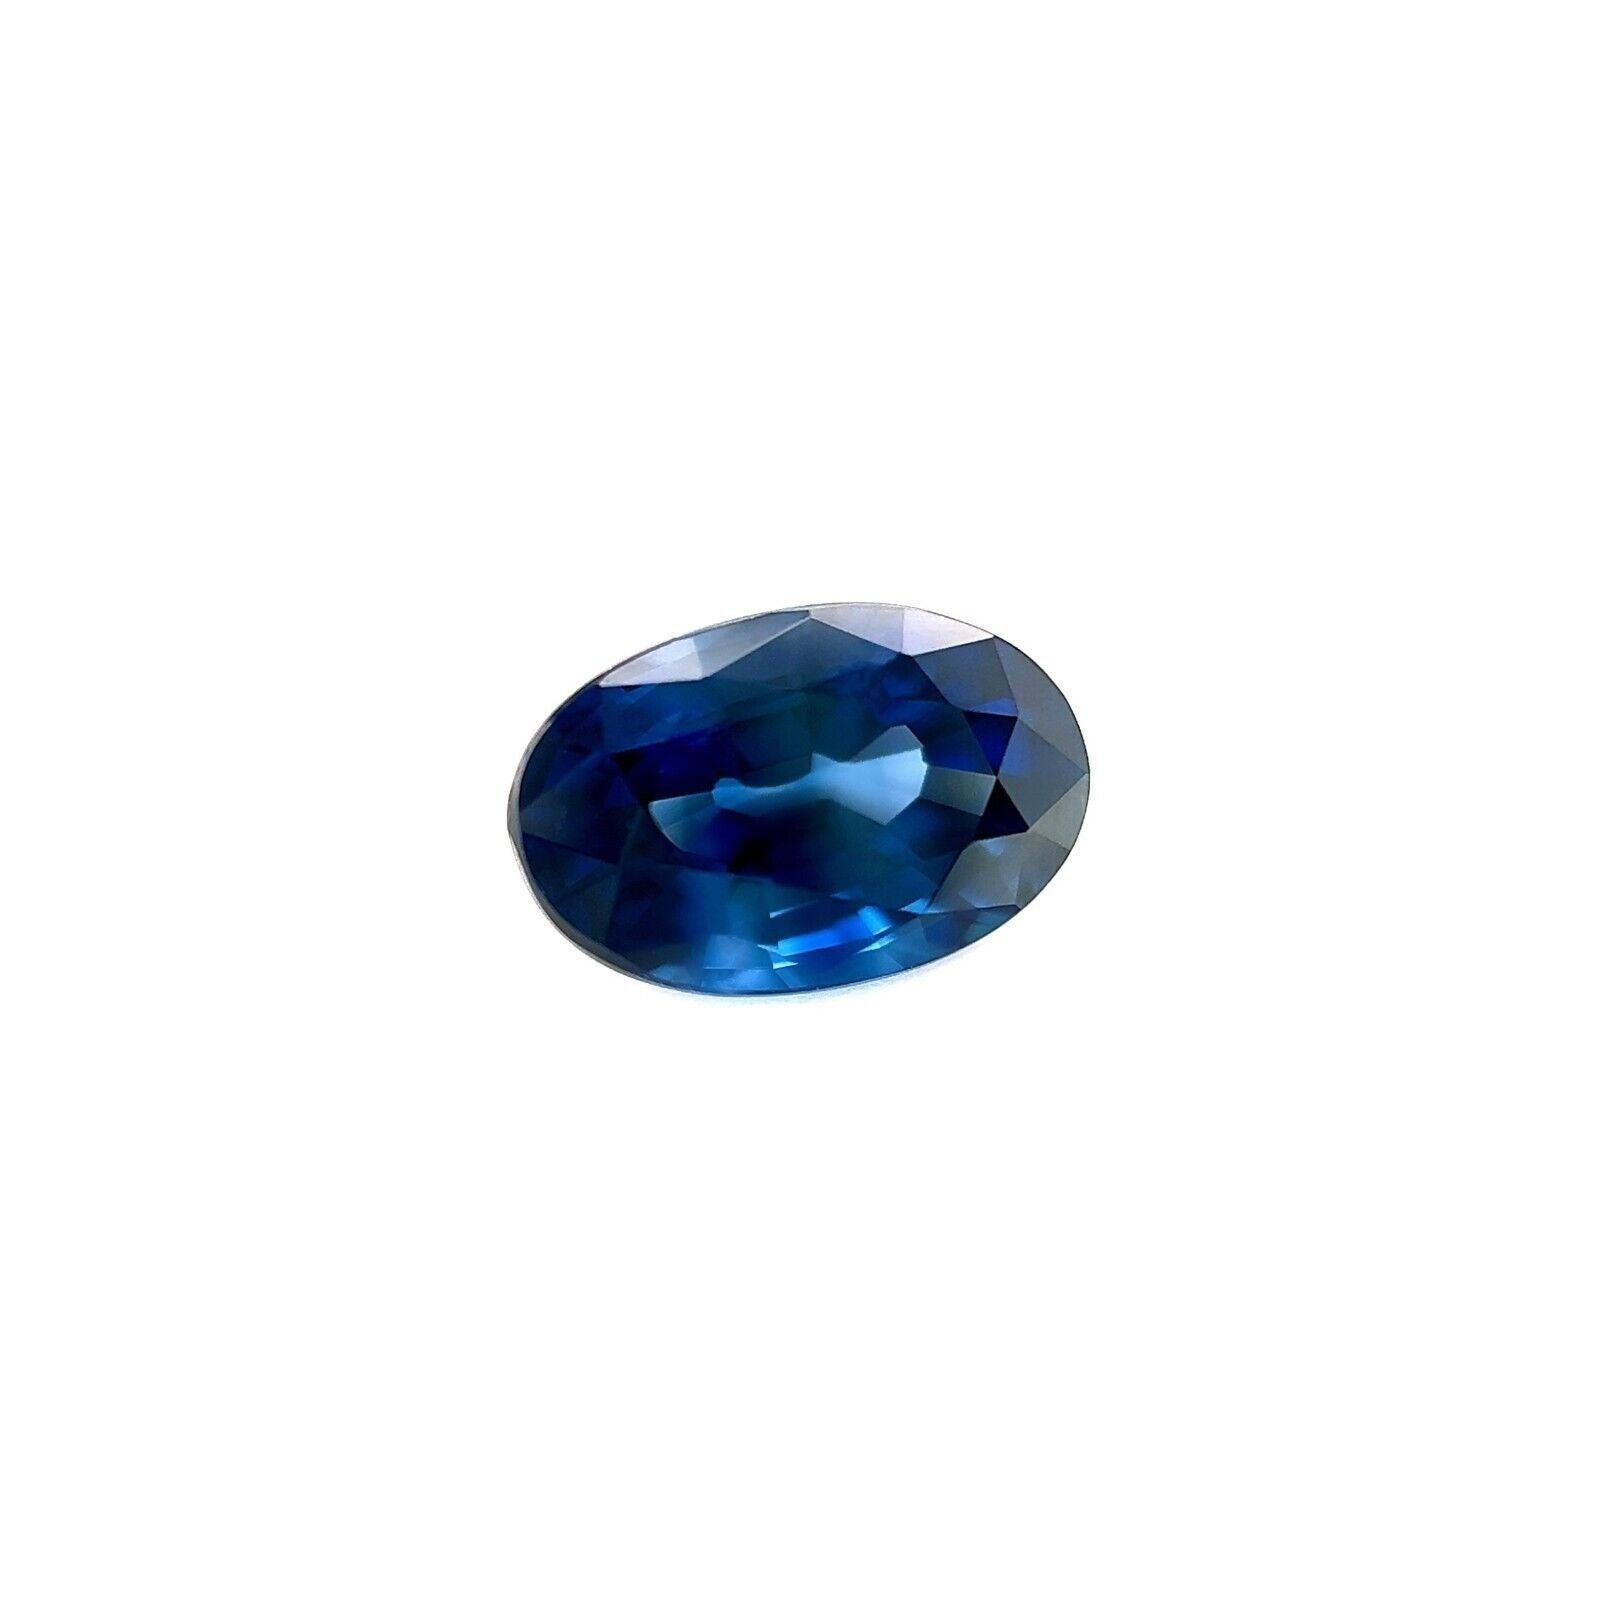 1.56ct Ceylon Sapphire Royal Blue Oval Cut Natural Gemstone 8X5.3mm VS

Natural Deep Royal Blue Ceylon Sapphire Gemstone.
1.56 Carat with a beautiful and deep 'royal' blue colour and excellent clarity. VS.
Also has an excellent oval cut and polish